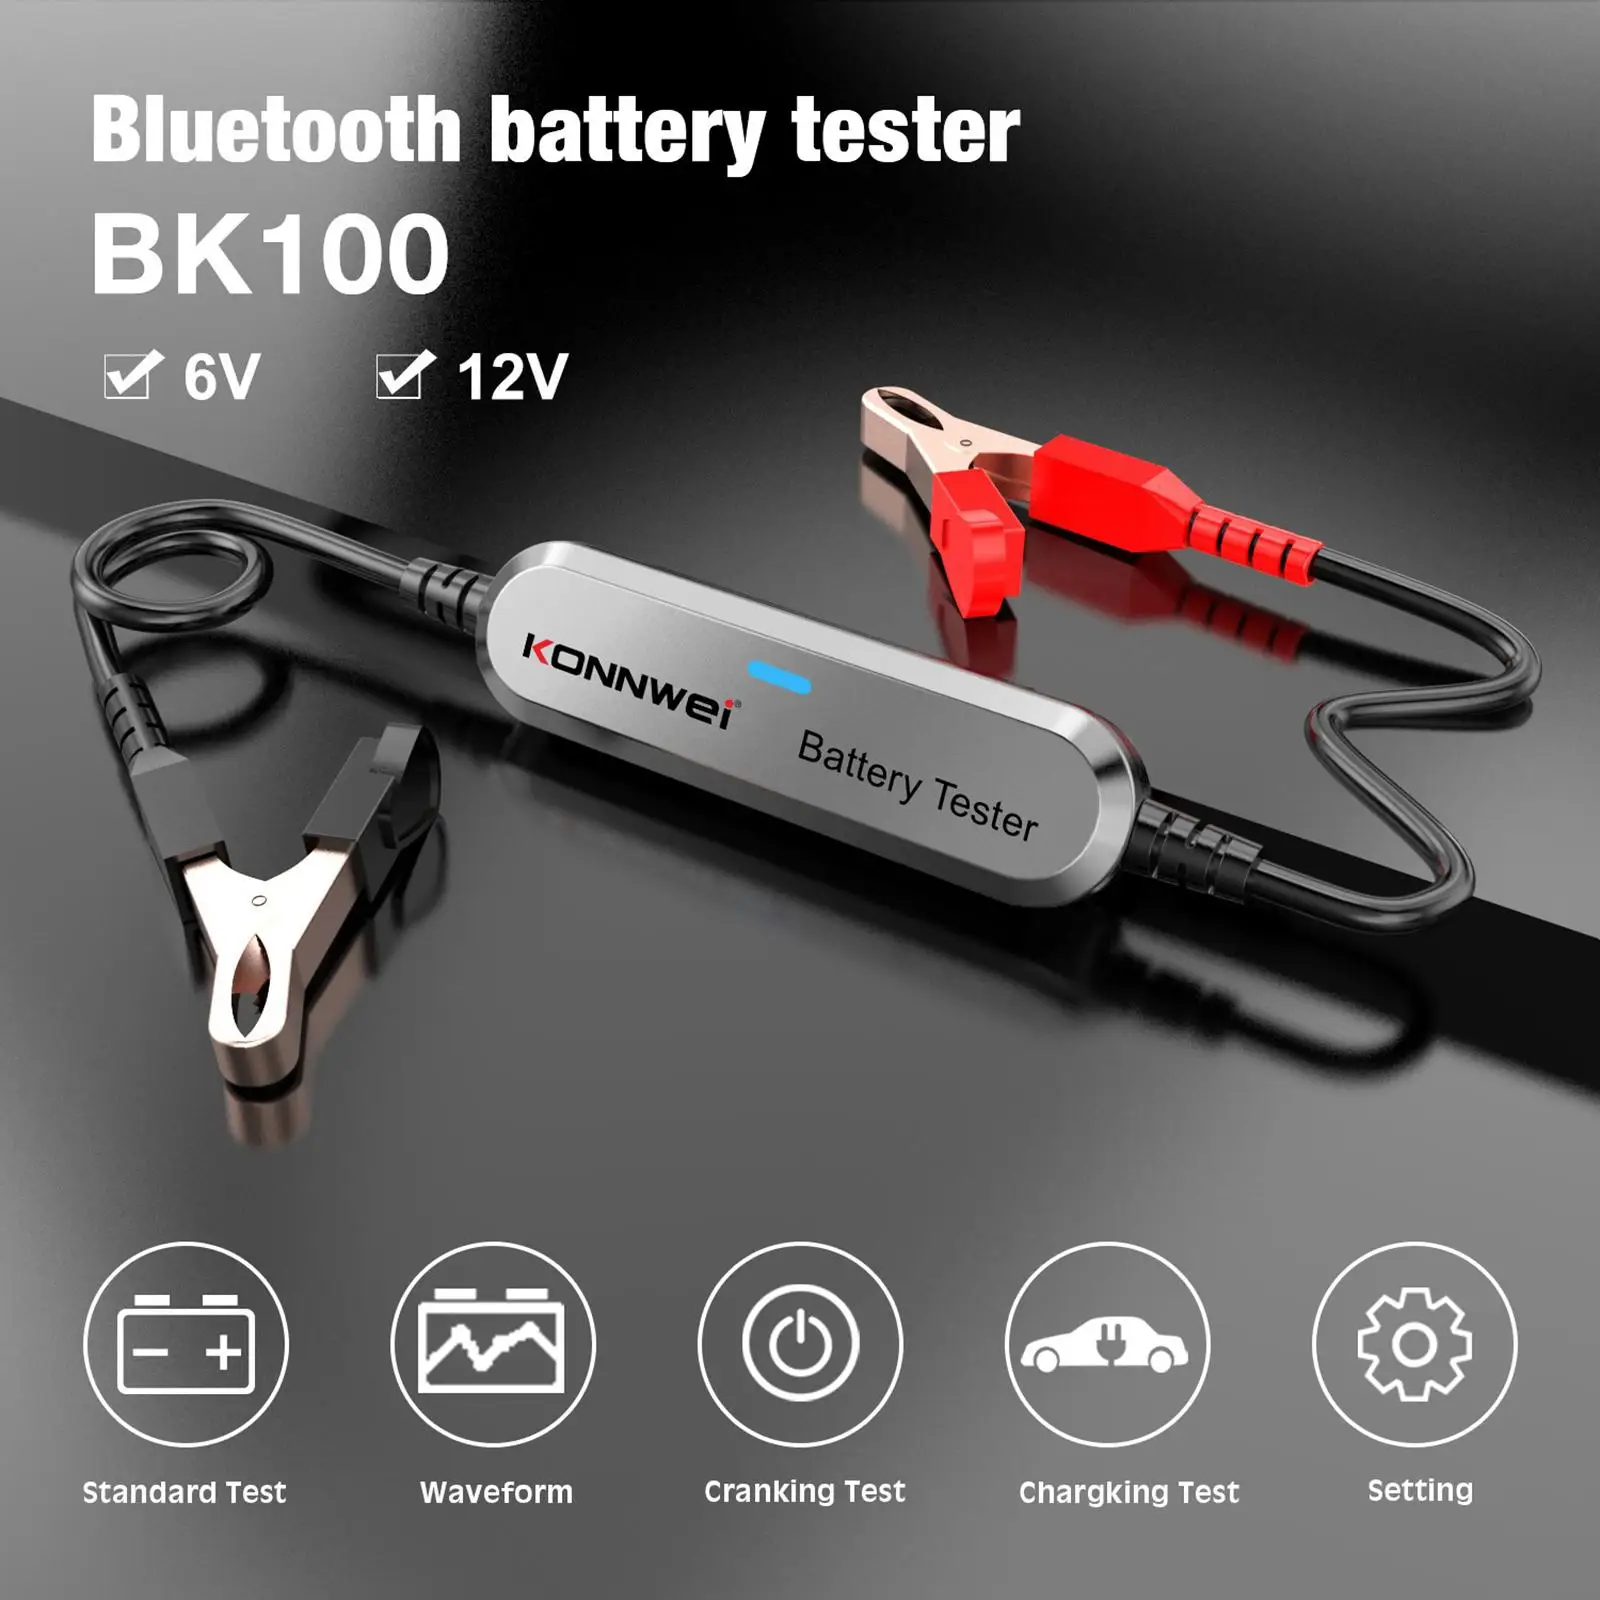 BK100 Wireless Car Battery Tester Charging Analyzer Bluetooth Battery Tester for Acid Battery Cars Trucks Multi Languages